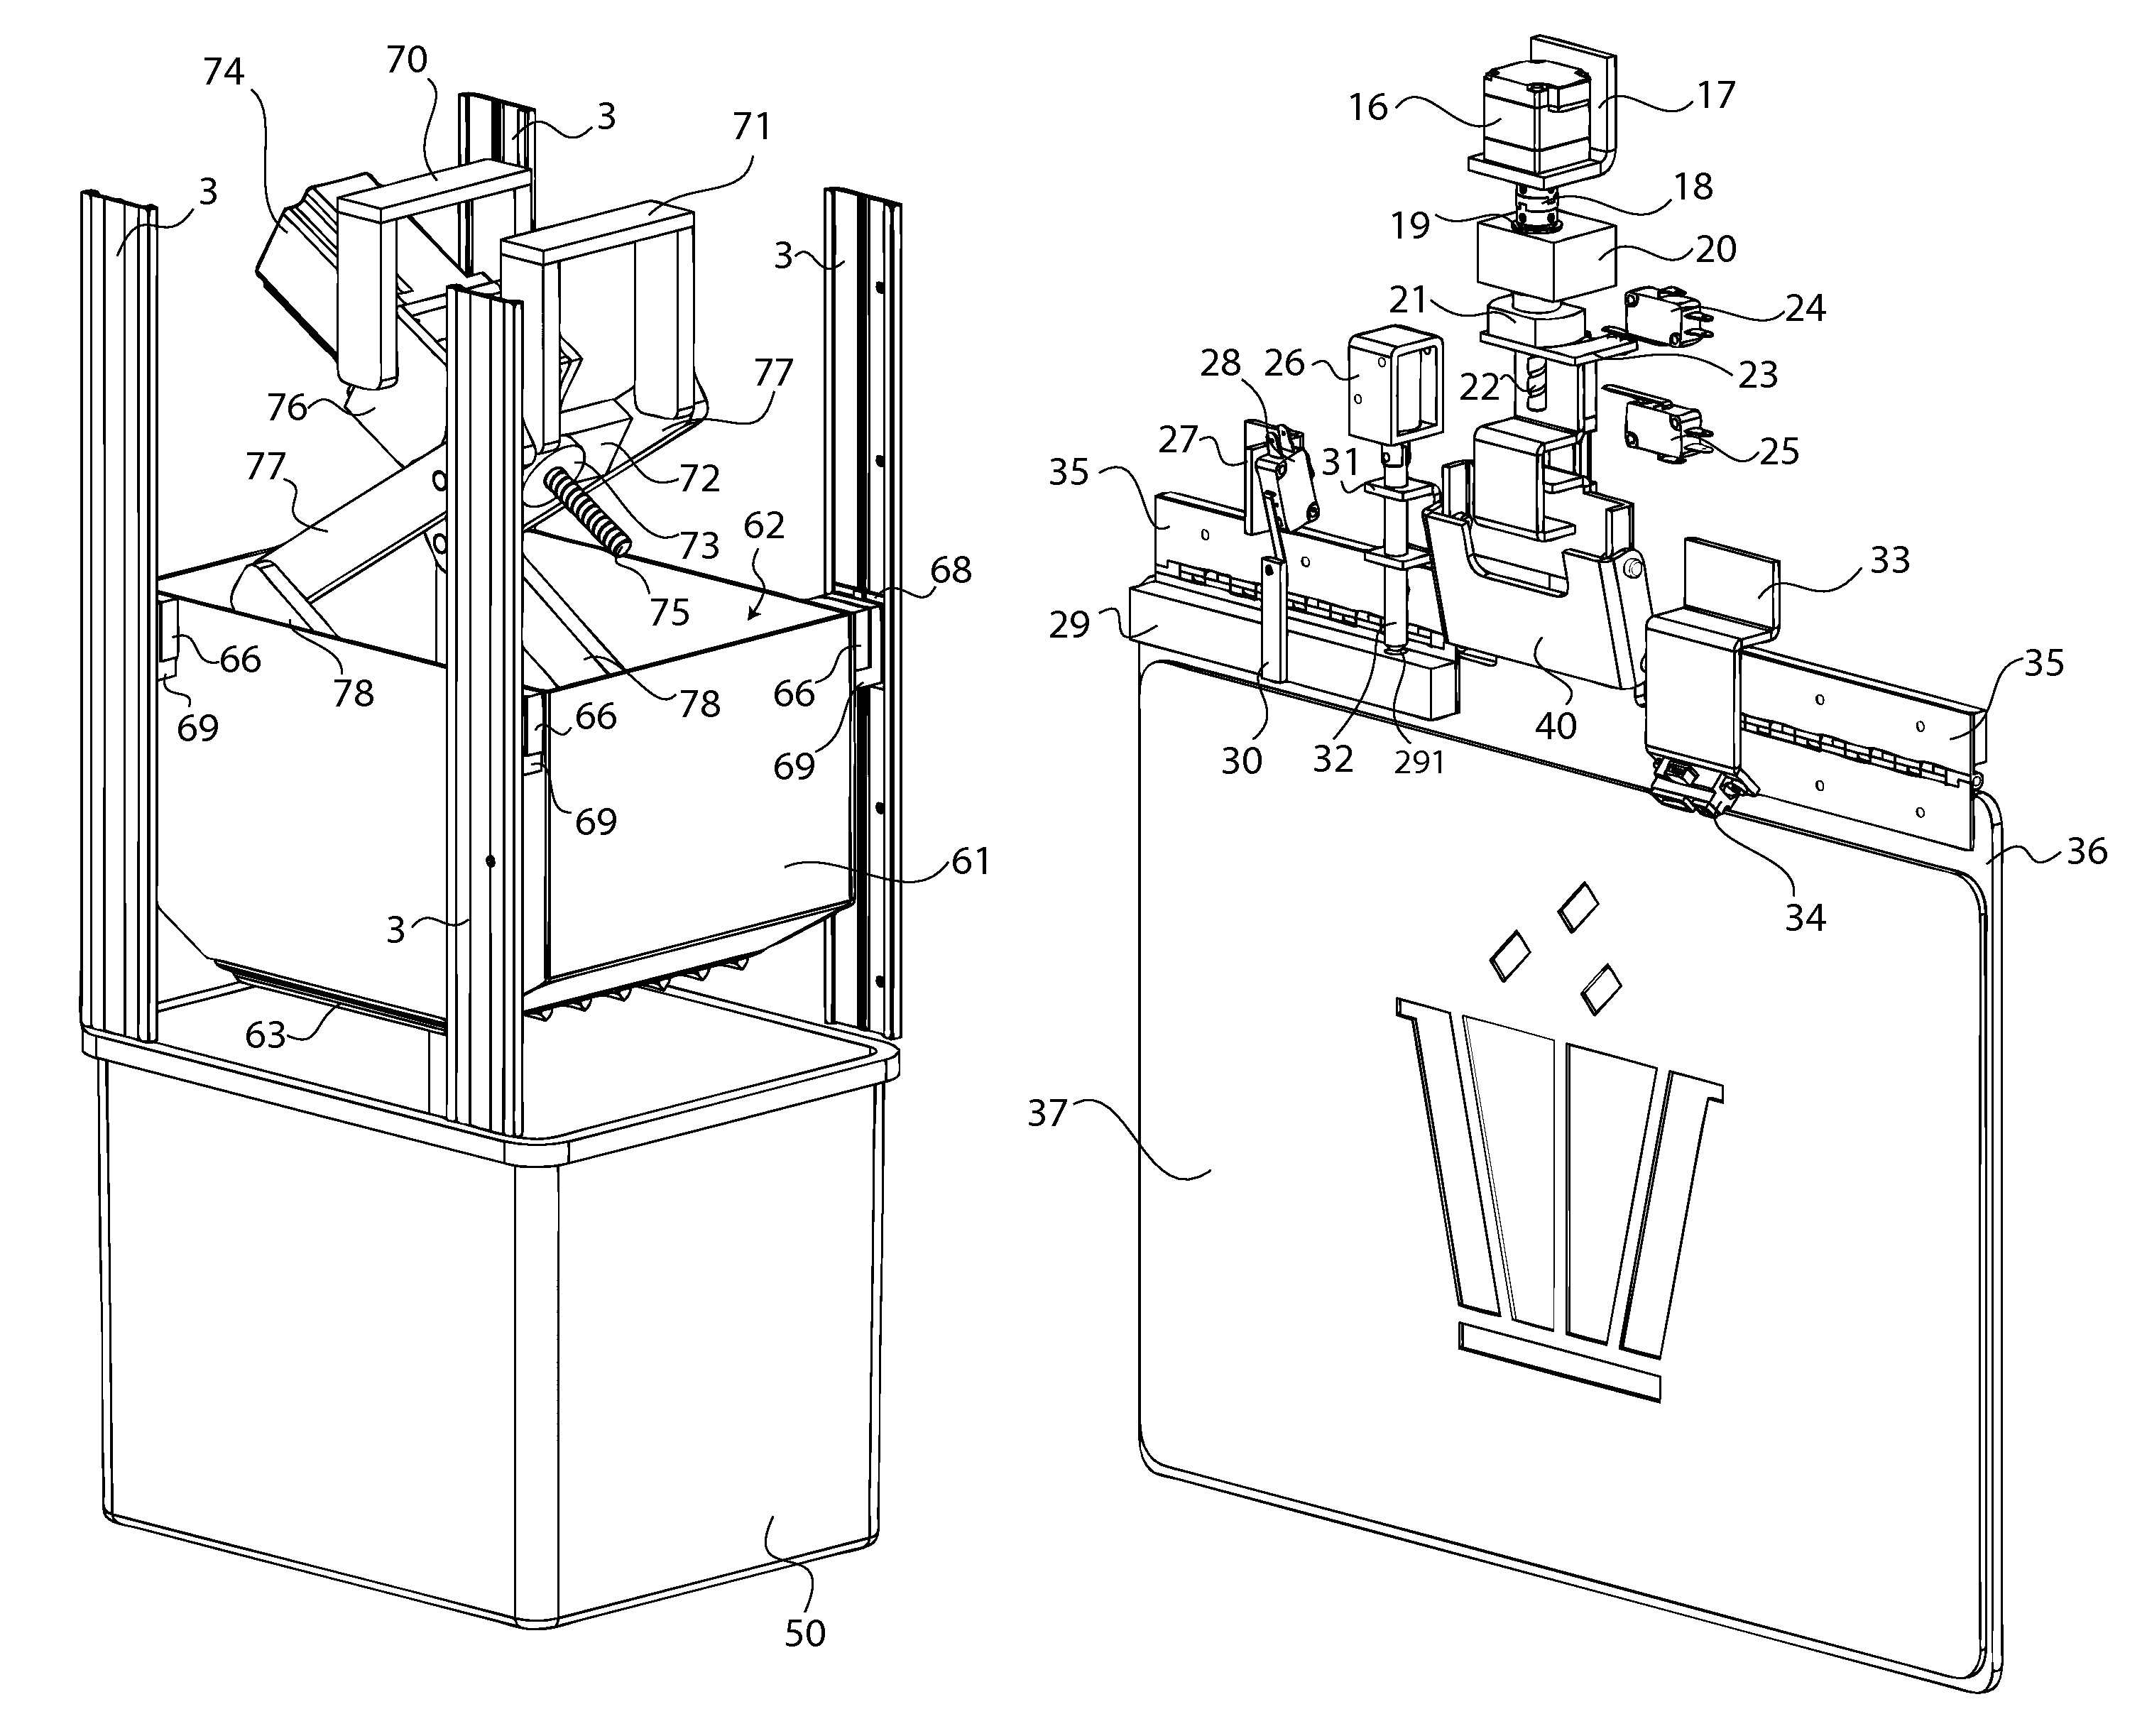 Waste compaction and lift gate mechanism